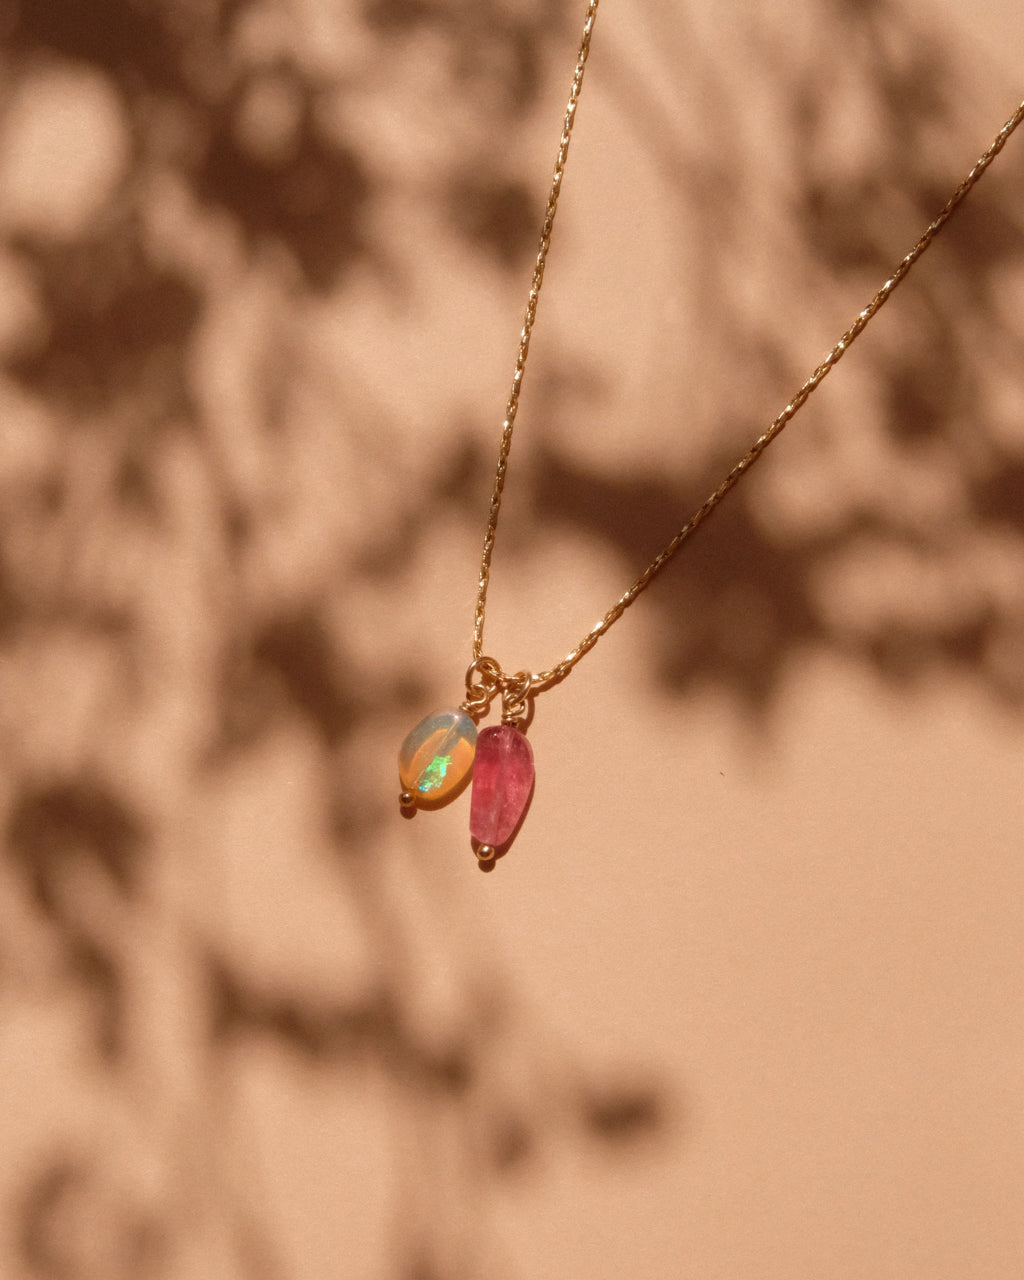 14K Gold Filled Opal & Tourmaline Necklace | Inspiration Her Jewellery